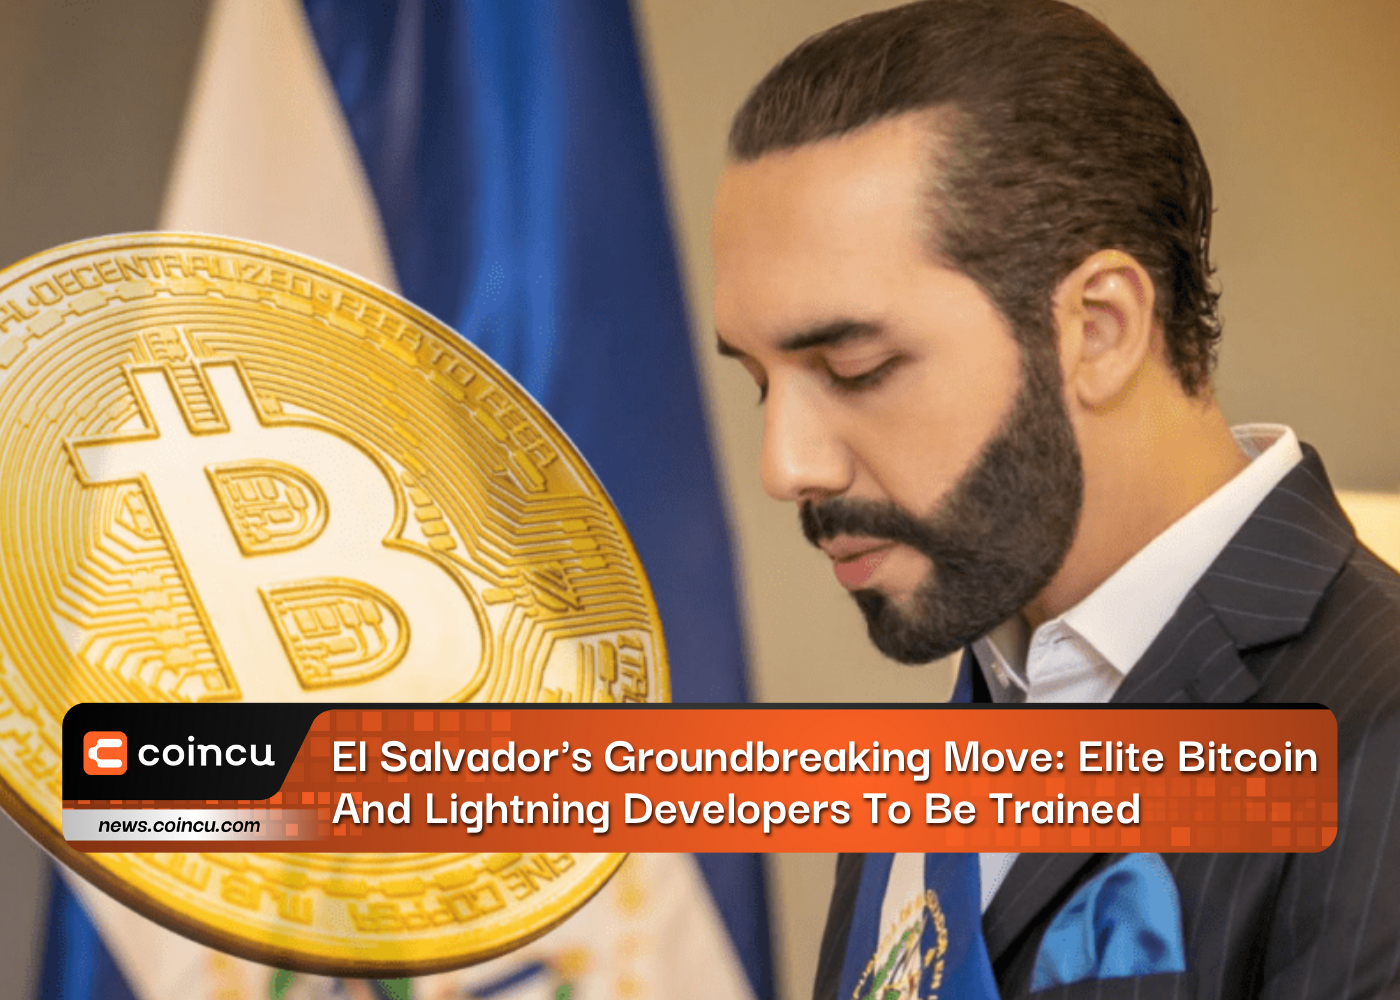 El Salvador's Groundbreaking Move: Elite Bitcoin And Lightning Developers To Be Trained